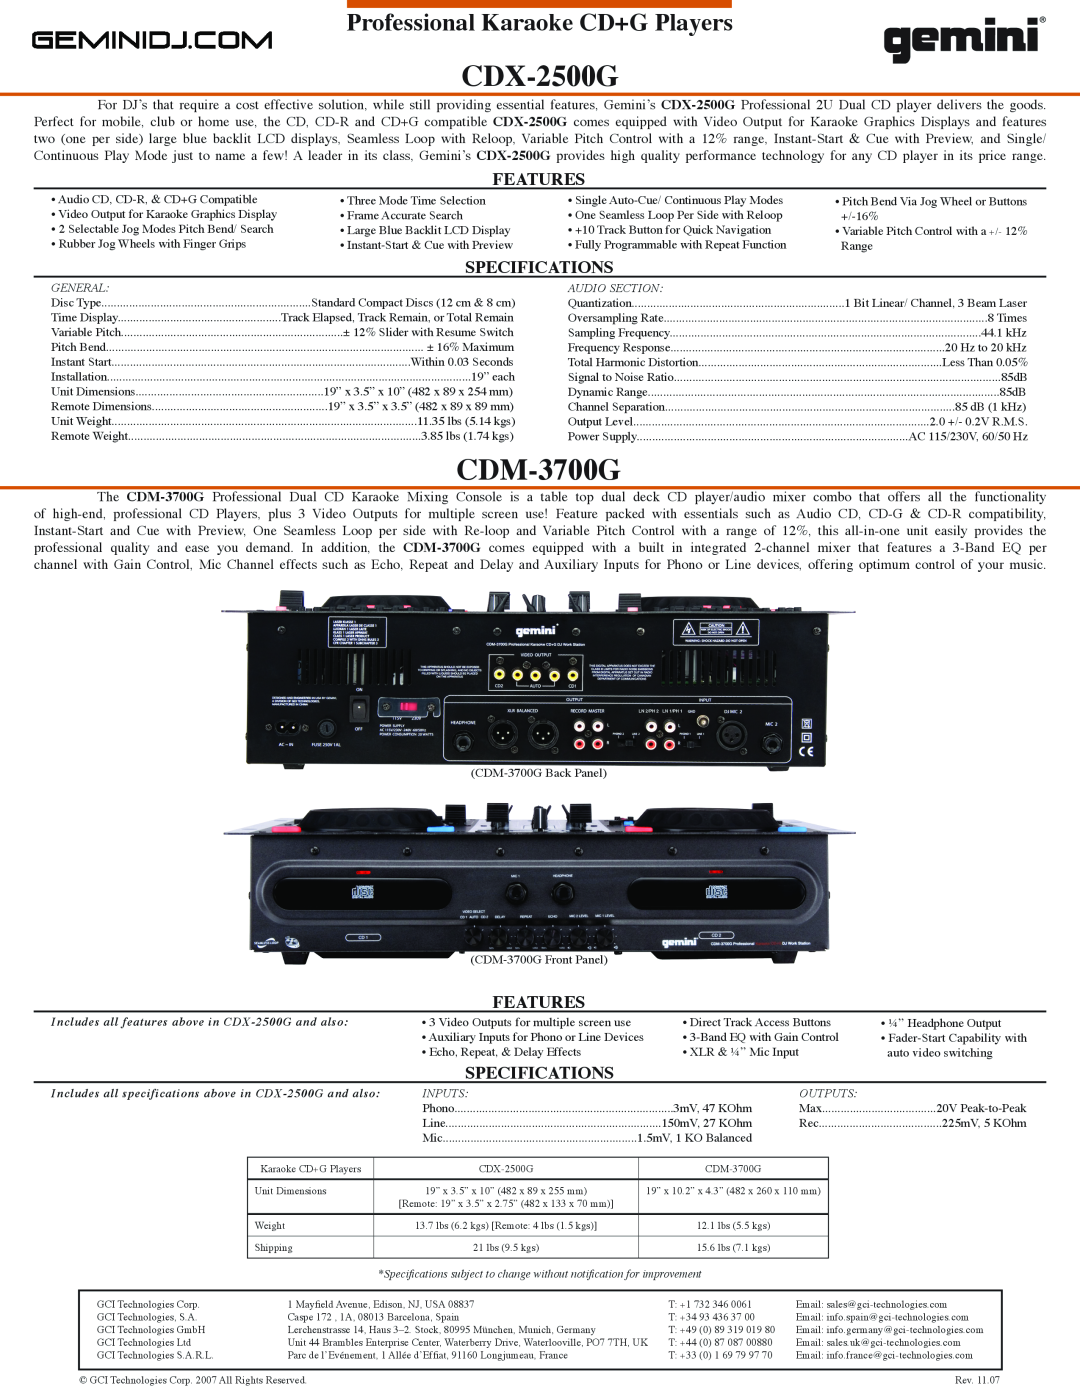 Gemini CDX-2500G manual CDM-3700G, Professional Karaoke CD+G Players, Features, Specifications 